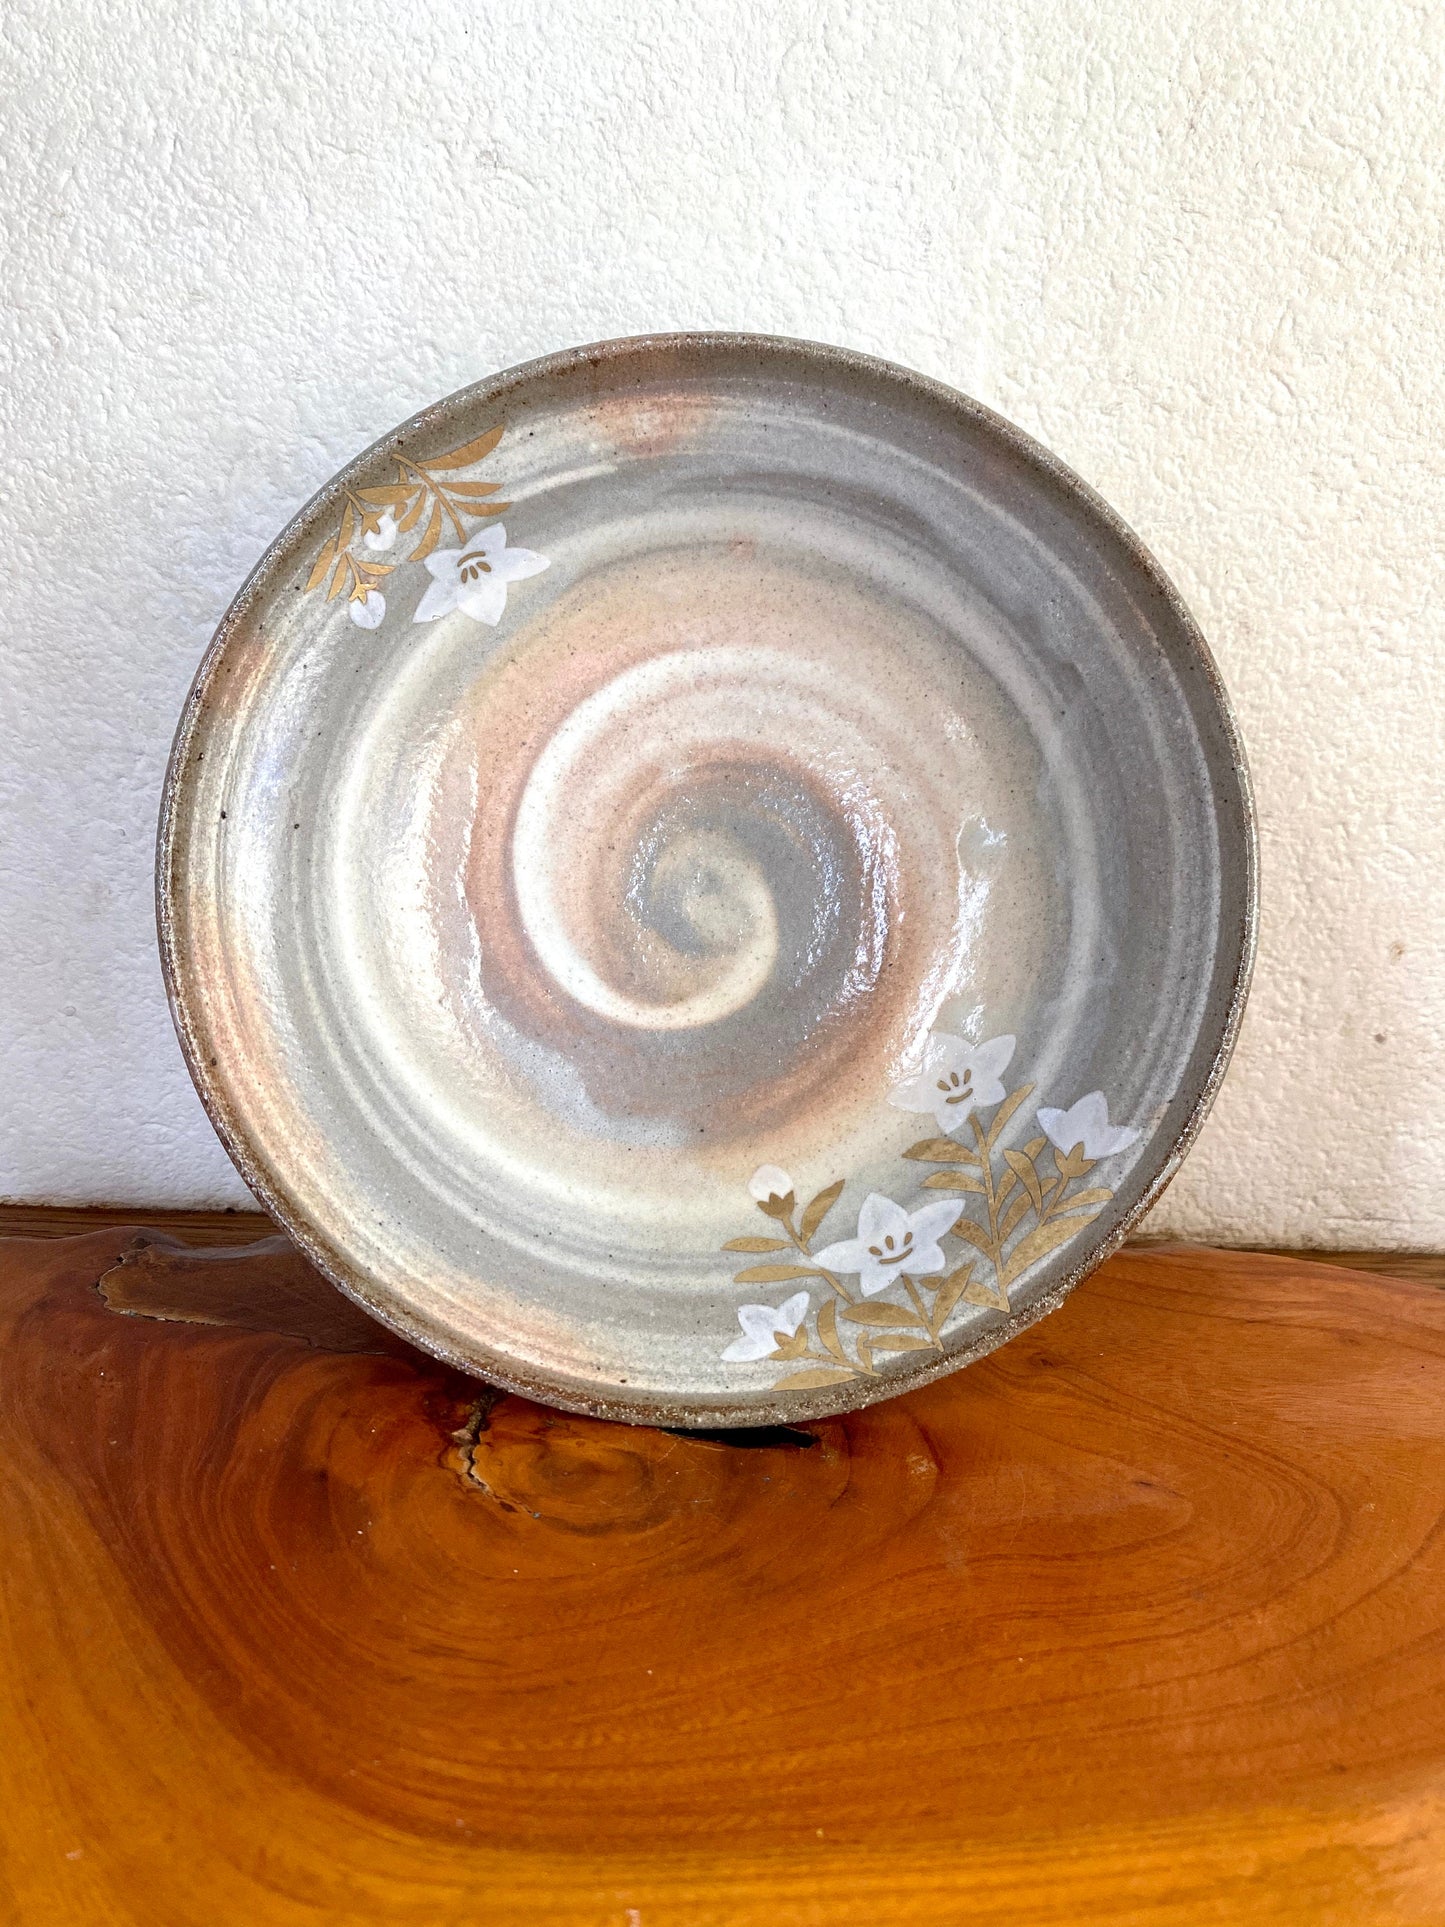 Japanese Porcelain Bowl, Tachikichi たち吉 橘吉 brand. 6.3" diameter 1.75" height.  It is good saucer for, small to medium Kokedama